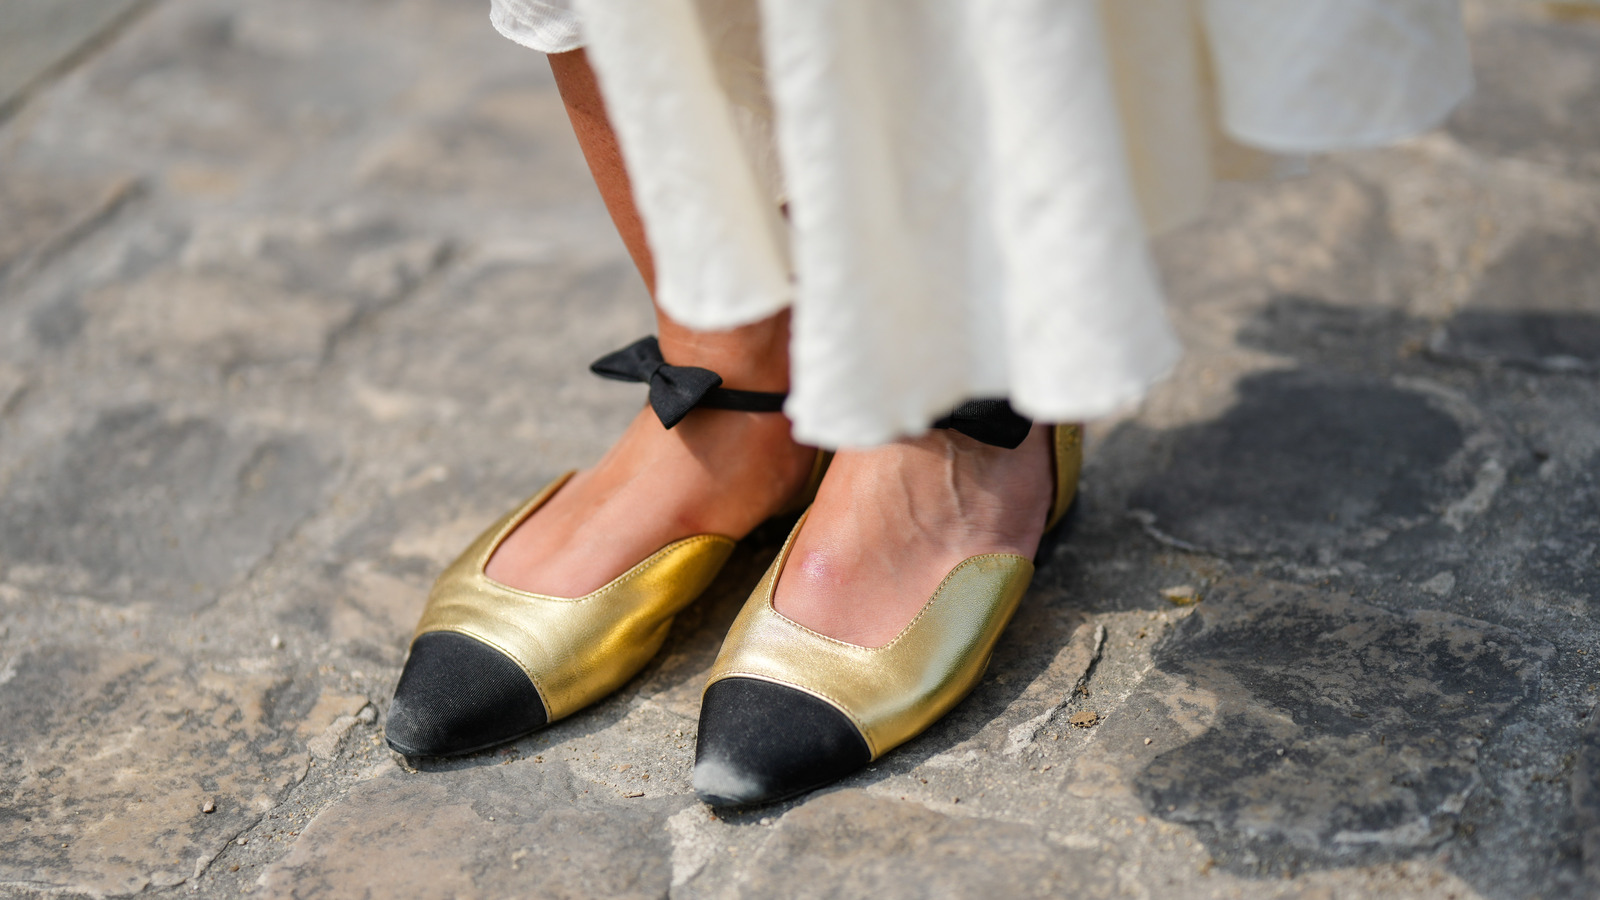 Metallic Ballet Flats Are The Best Way To Combine Both Trends For